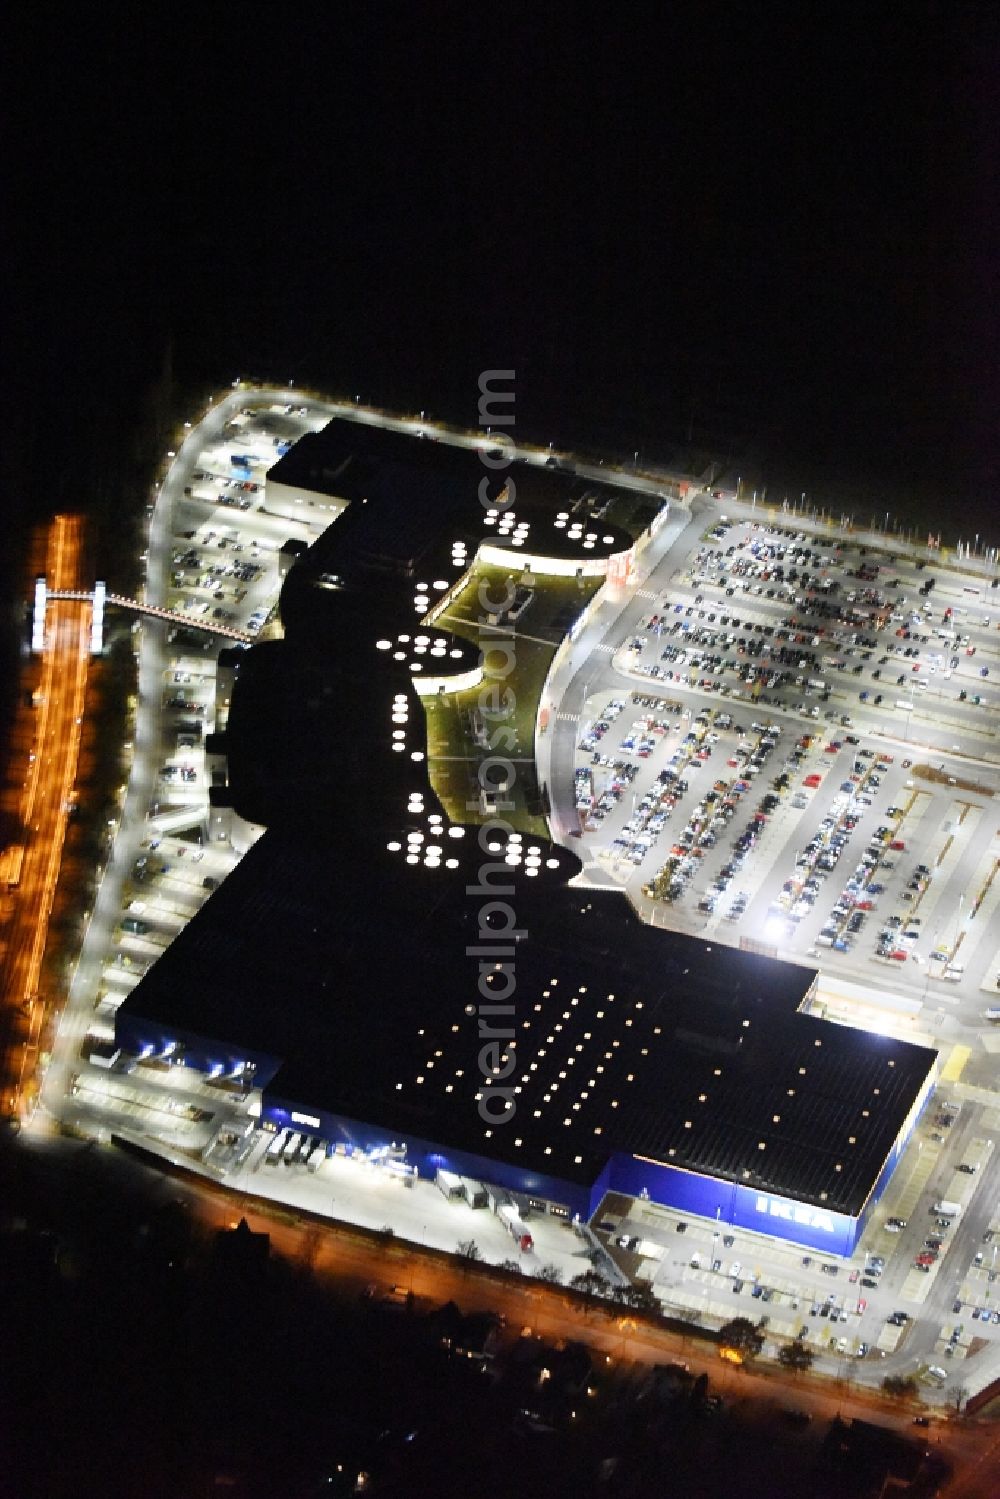 Aerial image at night Lübeck - Night view building the shopping mall LUV SHOPPING at IKEA furnishing house in Daenischburg, Luebeck in Schleswig-Holstein